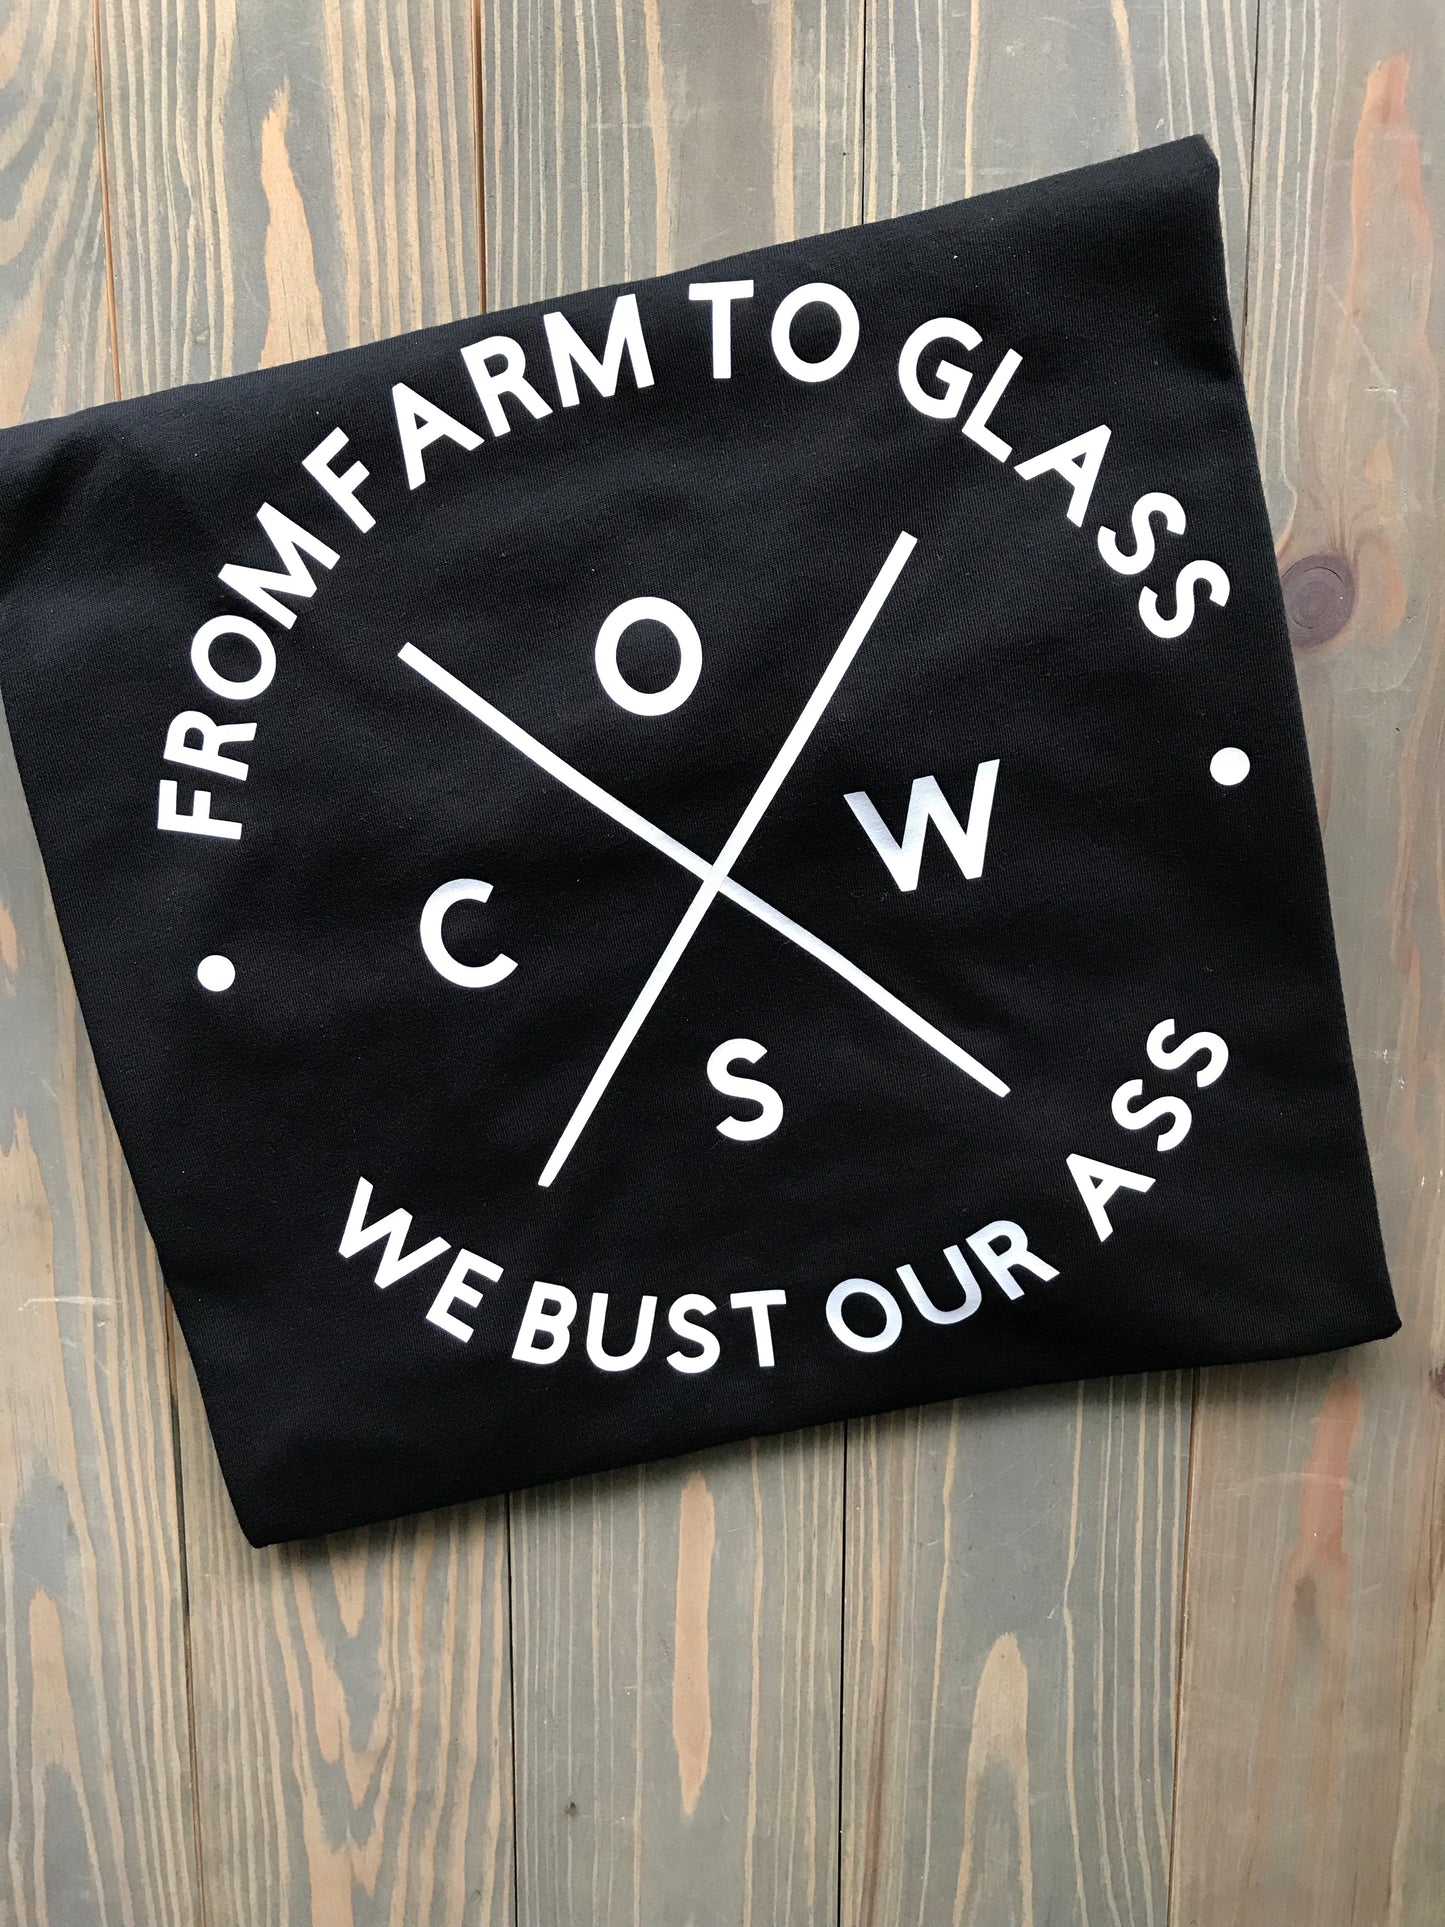 FROM FARM TO GLASS (MEN'S)